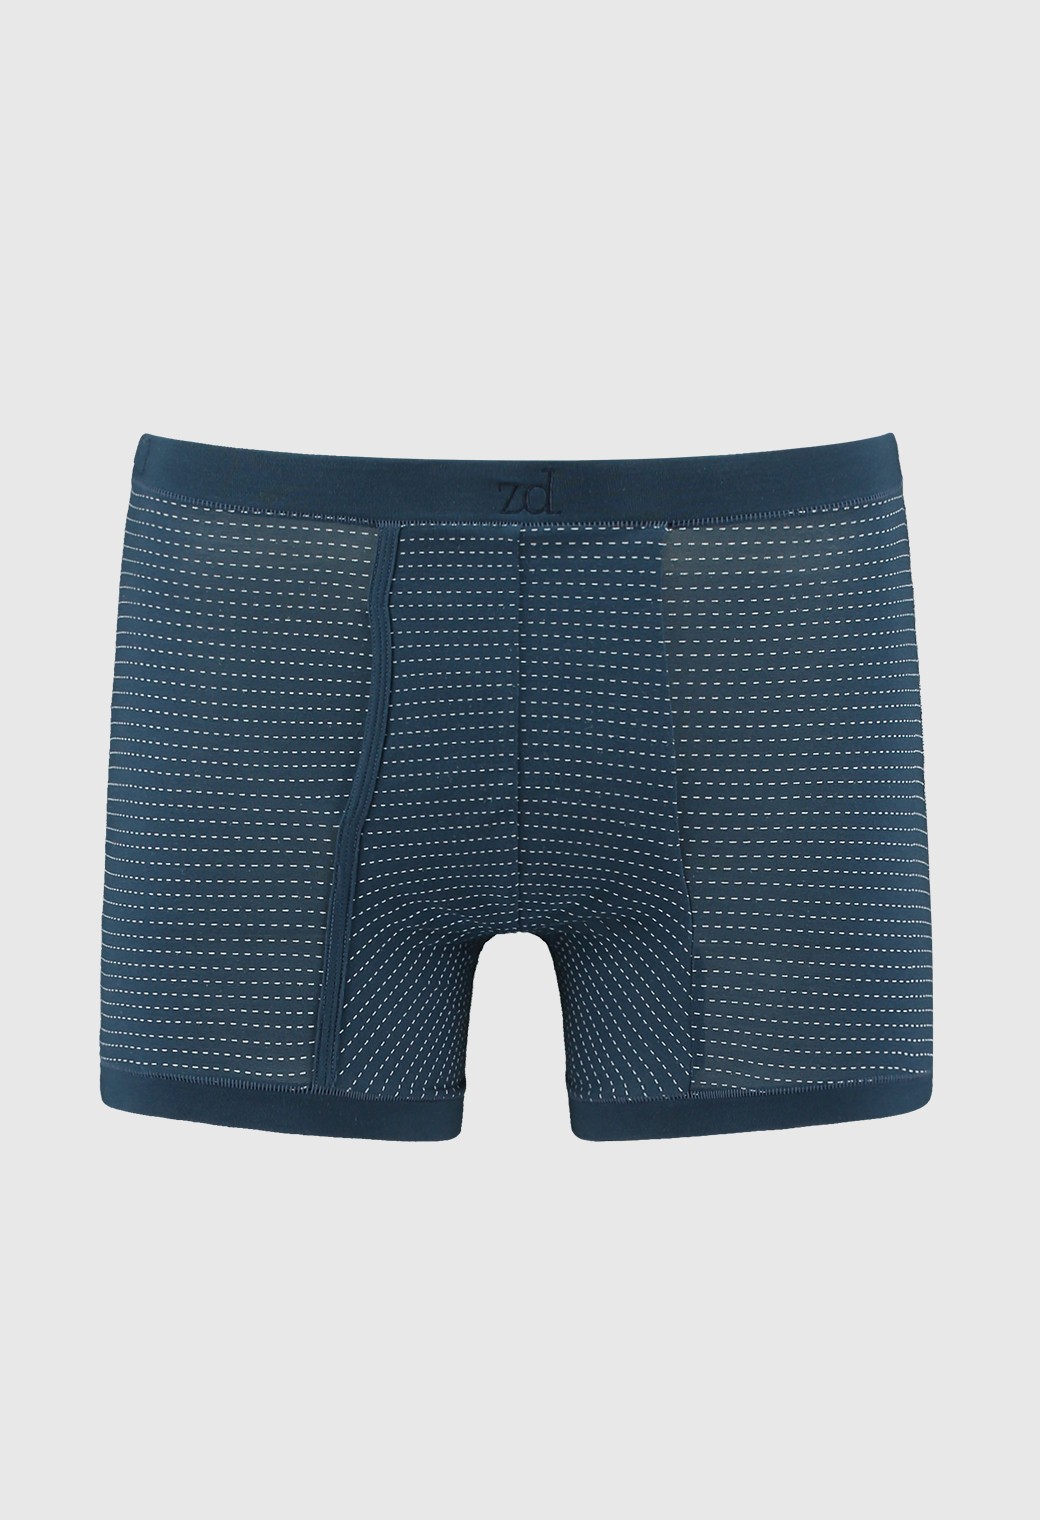 Fly Front Boxer Gentleman plus size